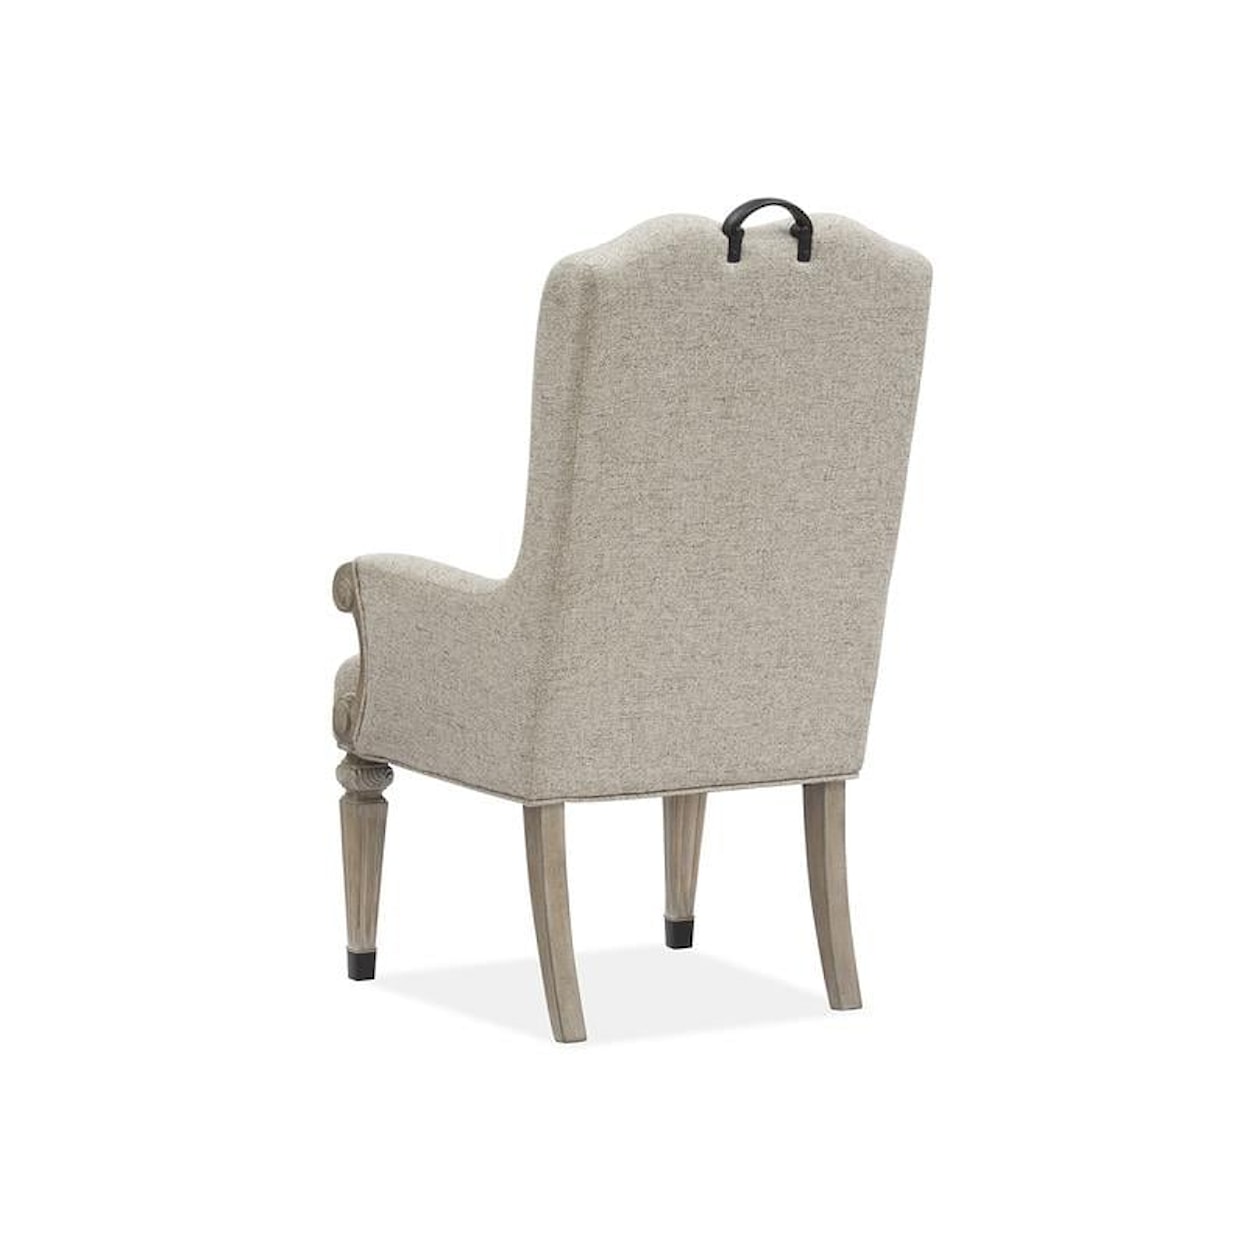 Magnussen Home Marisol Dining Upholstered Dining Arm Chair 